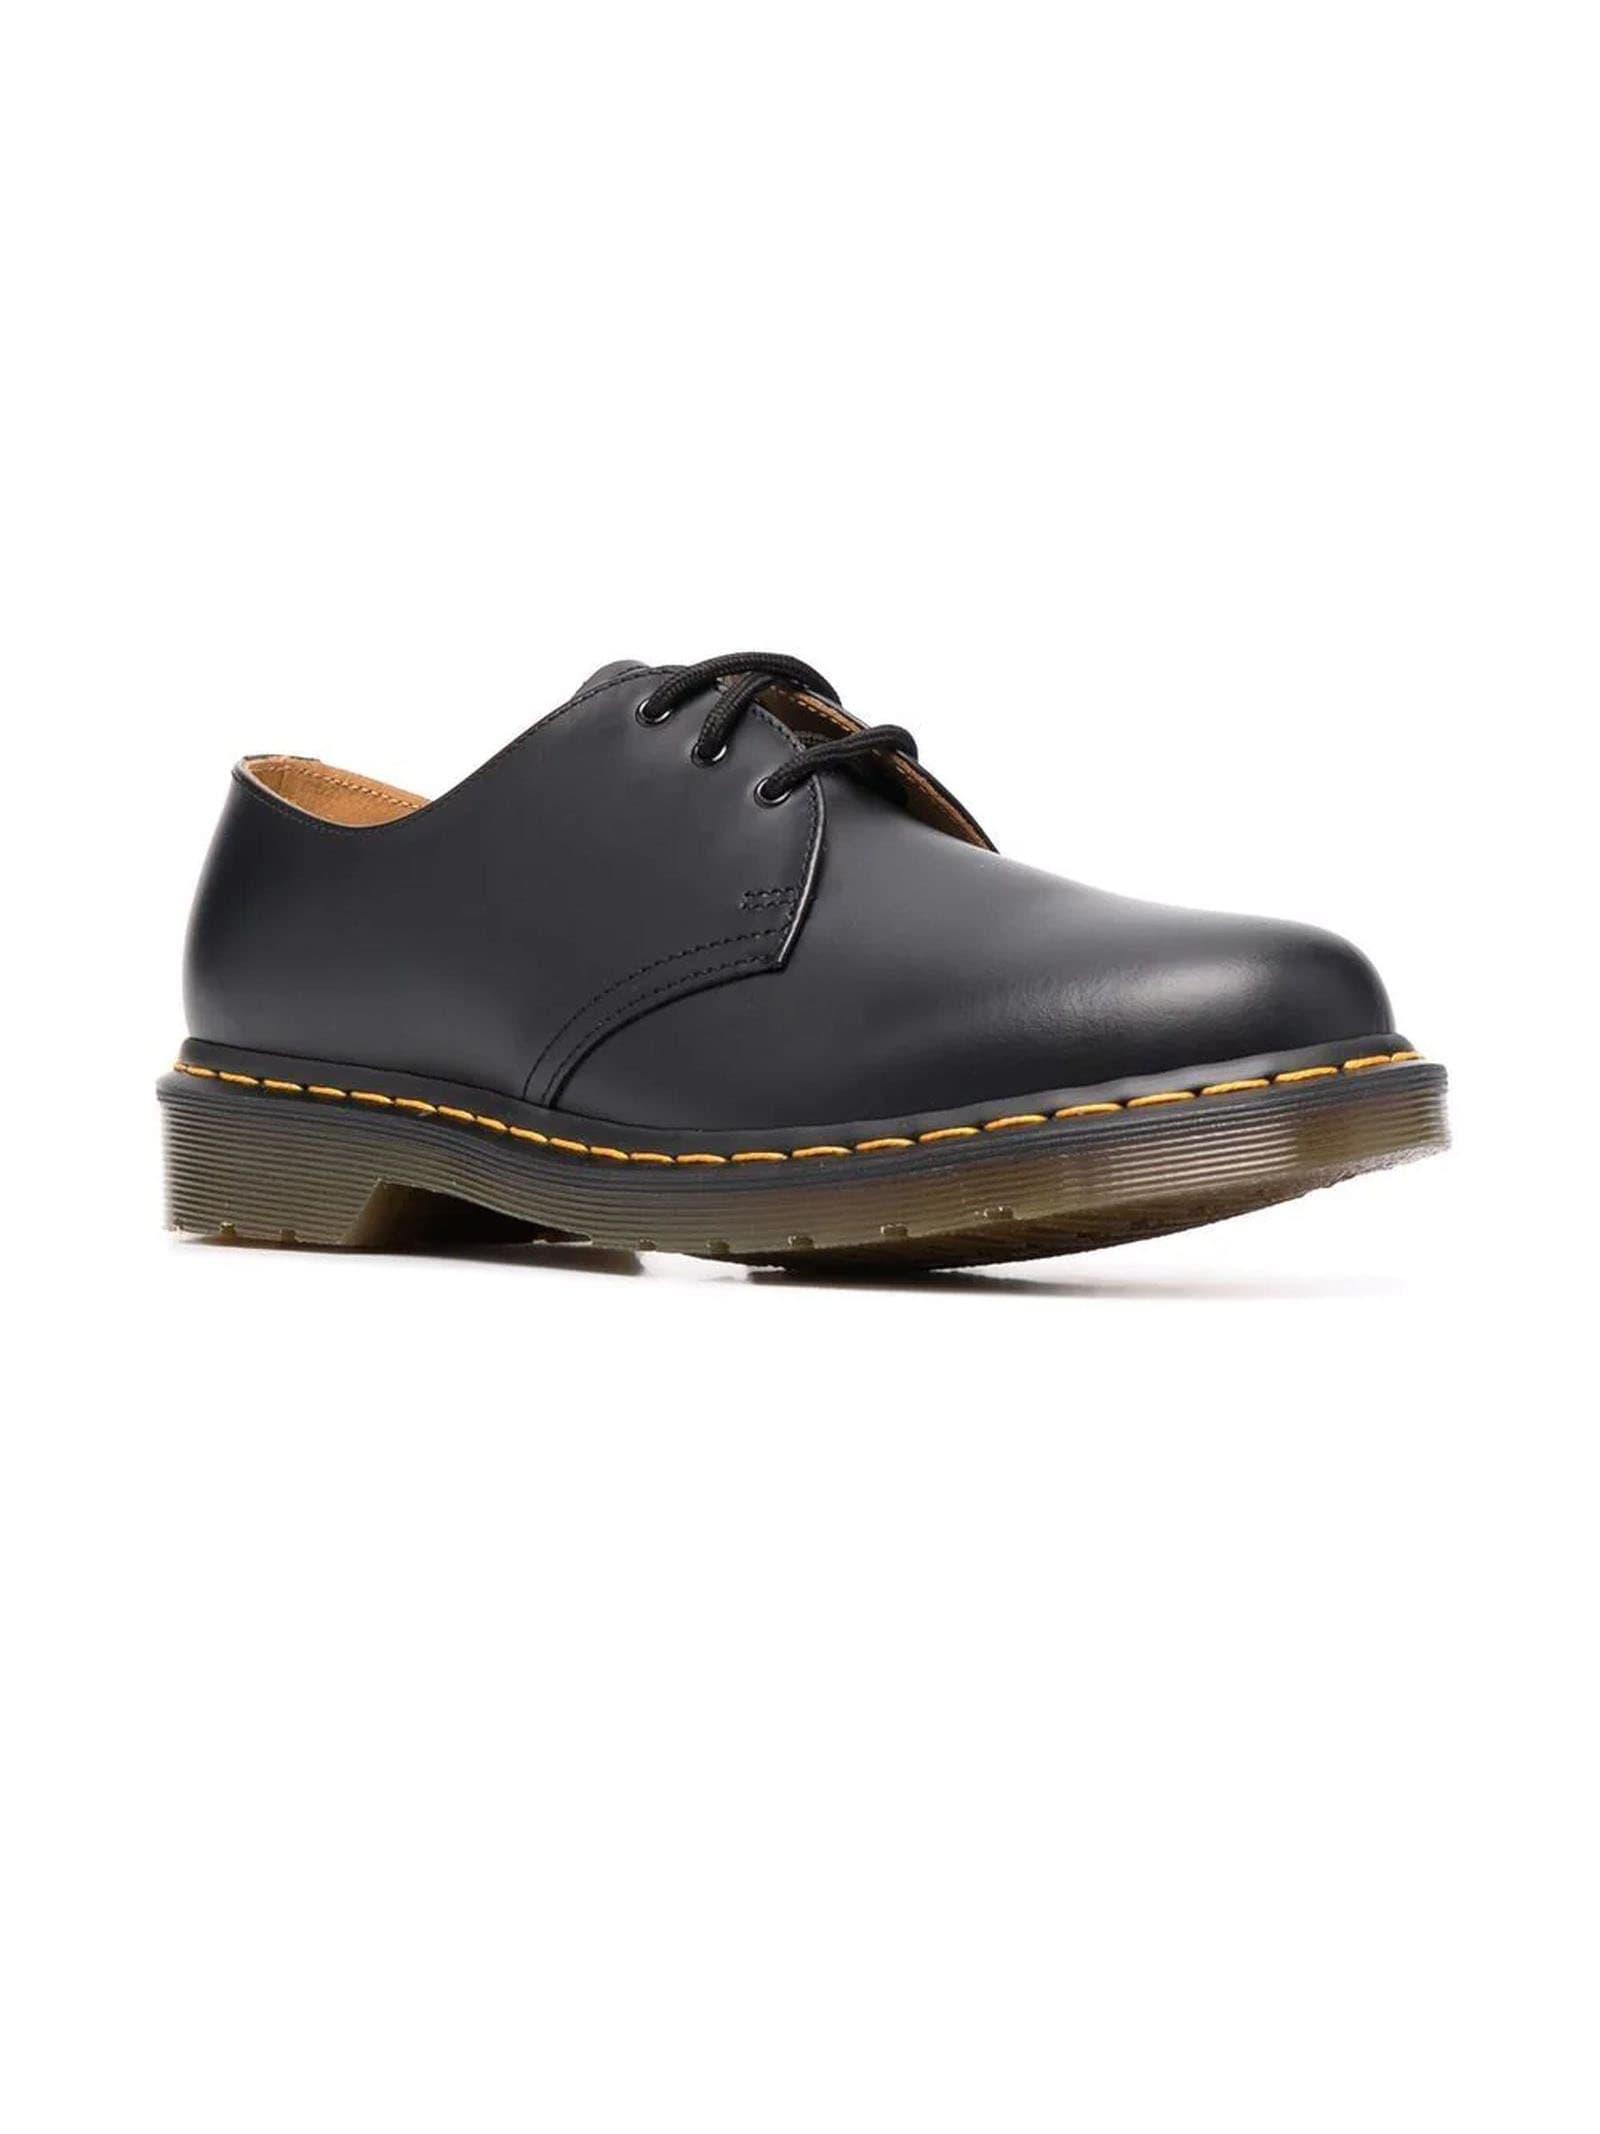 Dr. Martens Black Leather Oxford Shoes | Lyst